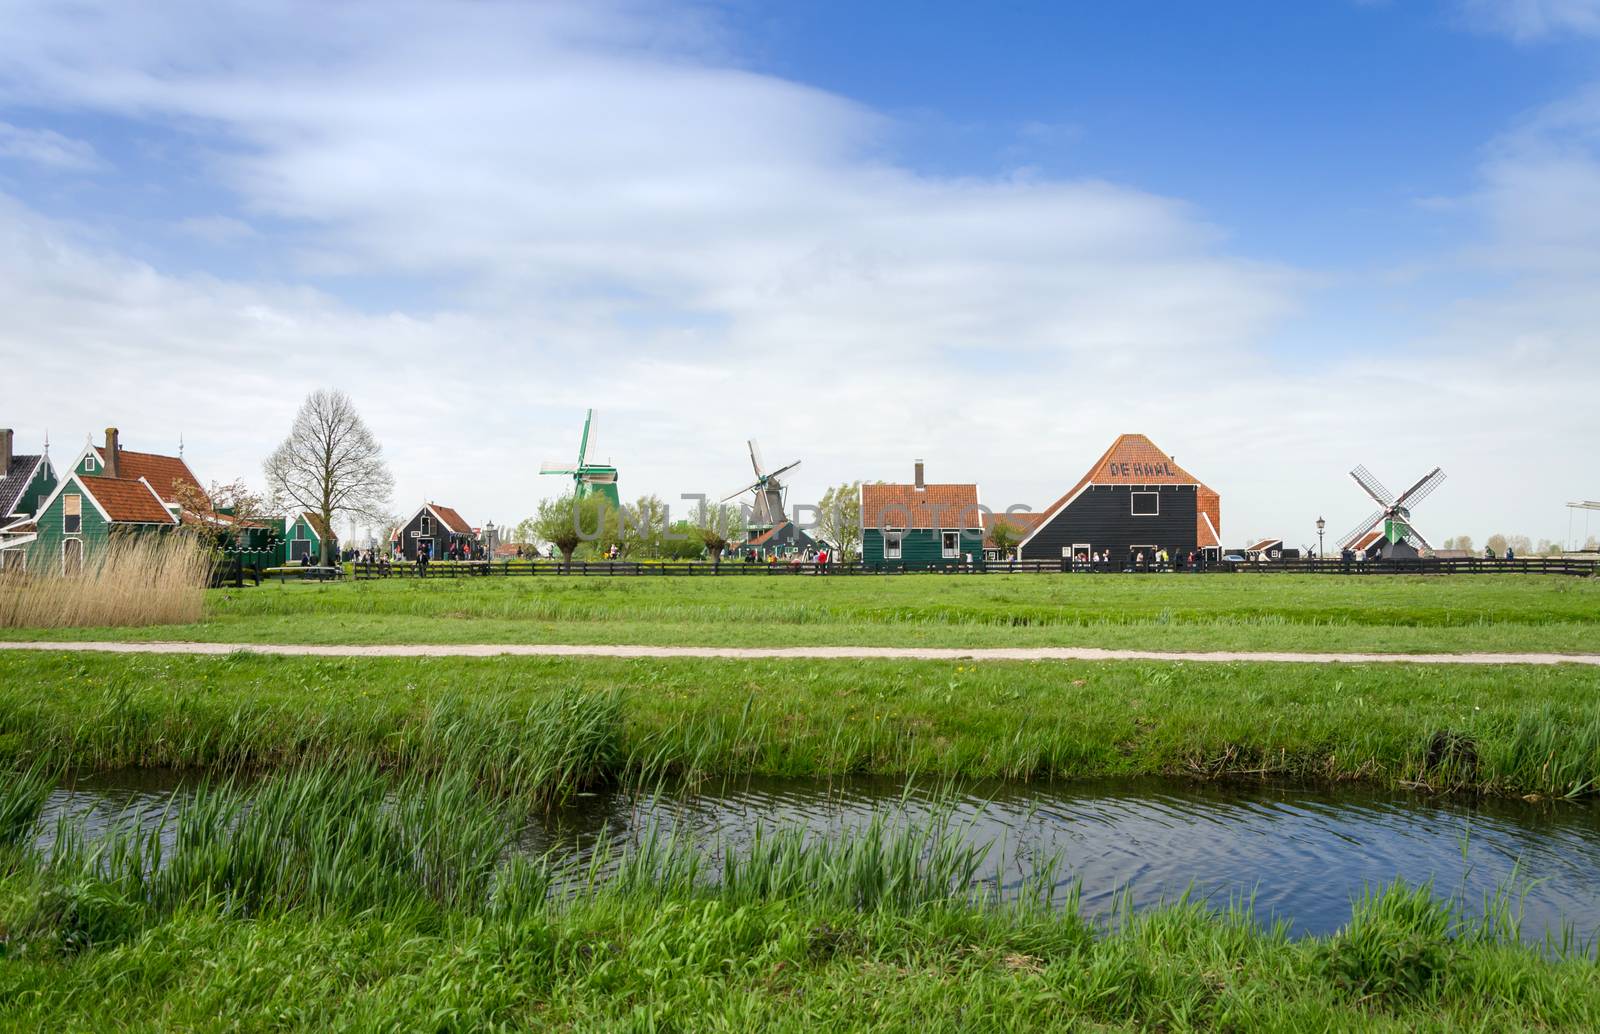 Windmills and rural houses in Zaanse Schans by siraanamwong